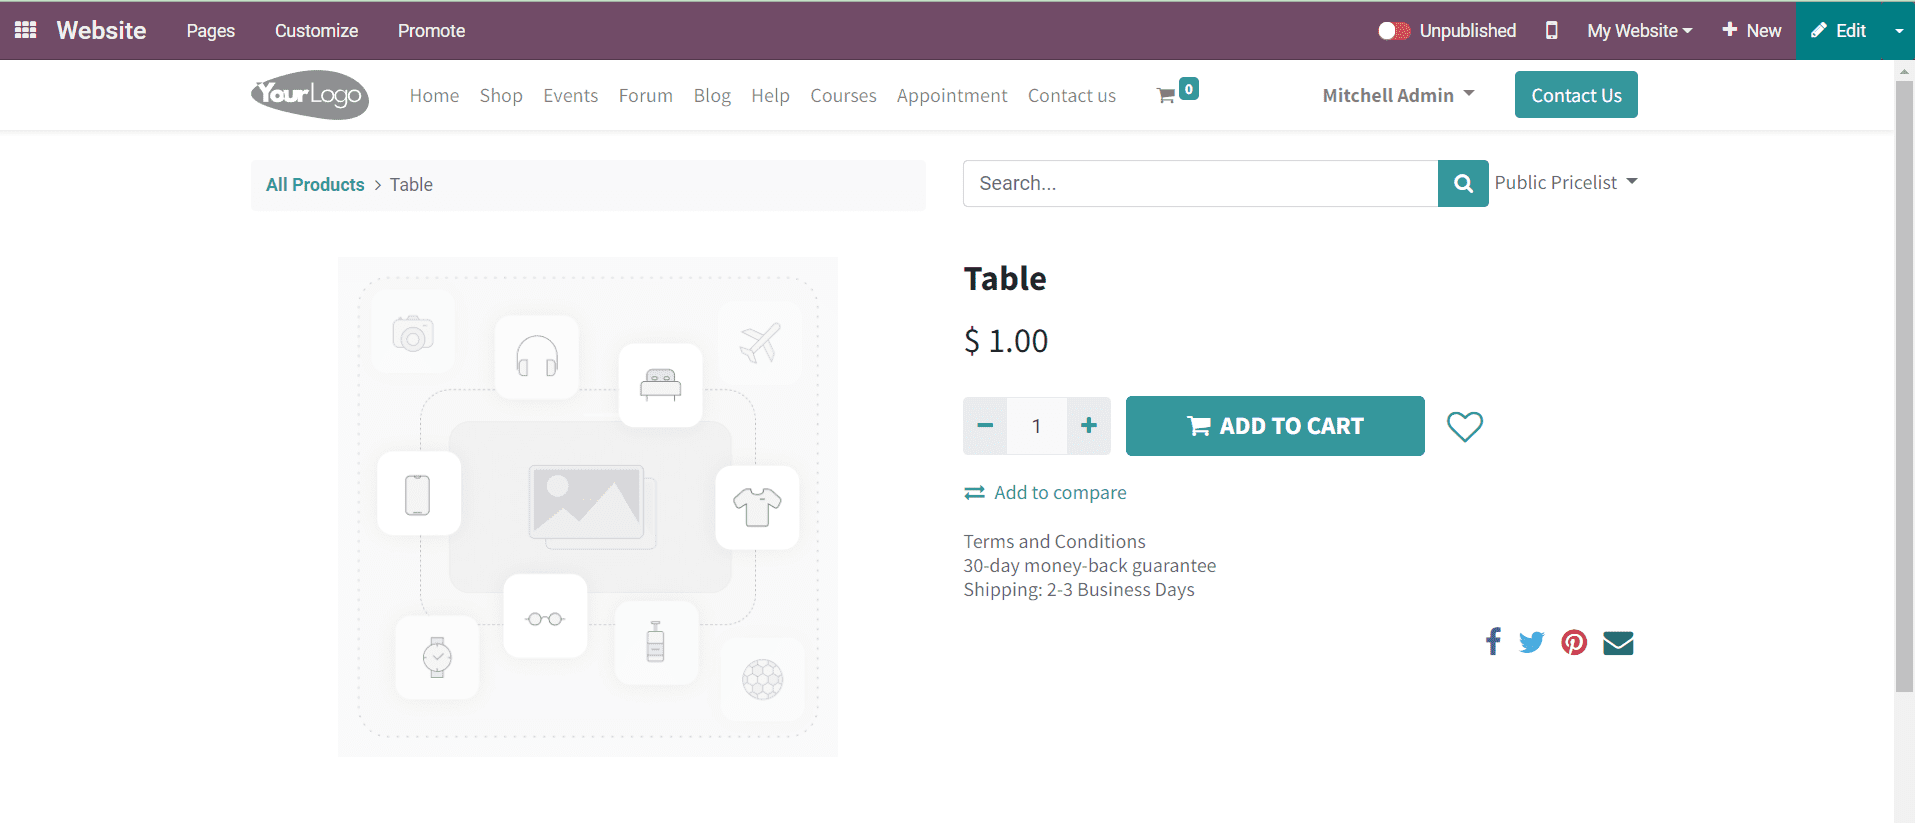 how-to-configure-products-for-ecommerce-with-odoo-website-cybrosys